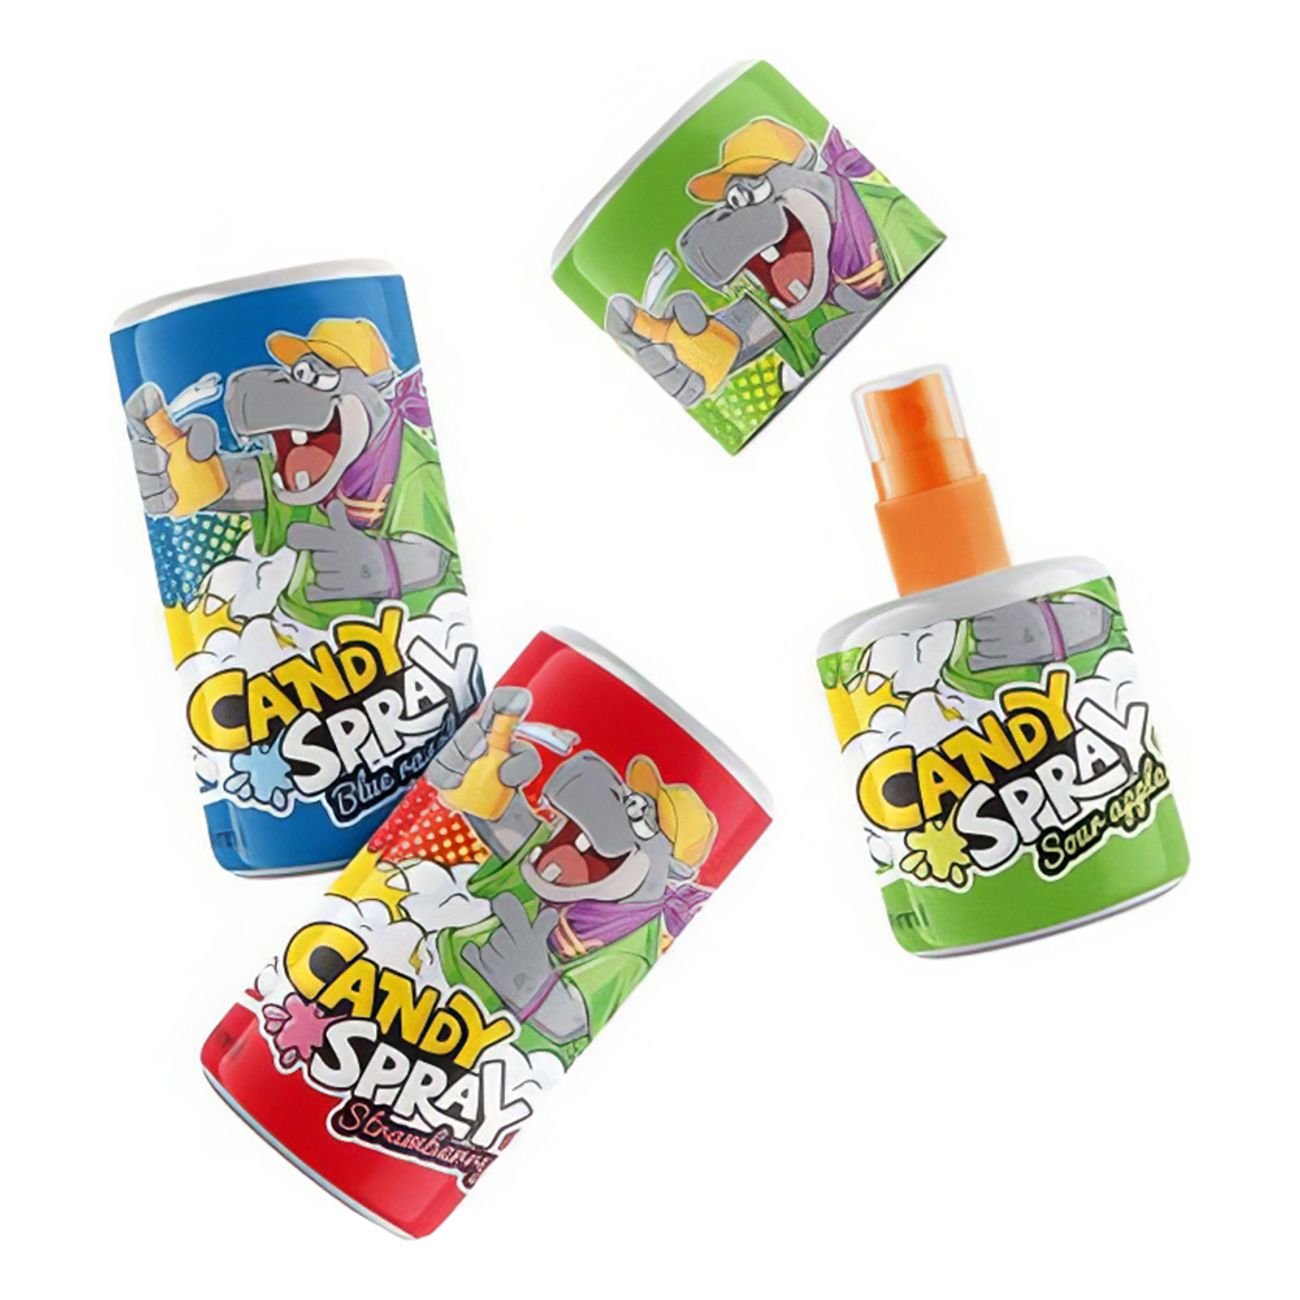 candy-spray-mix-storpack-100158-1